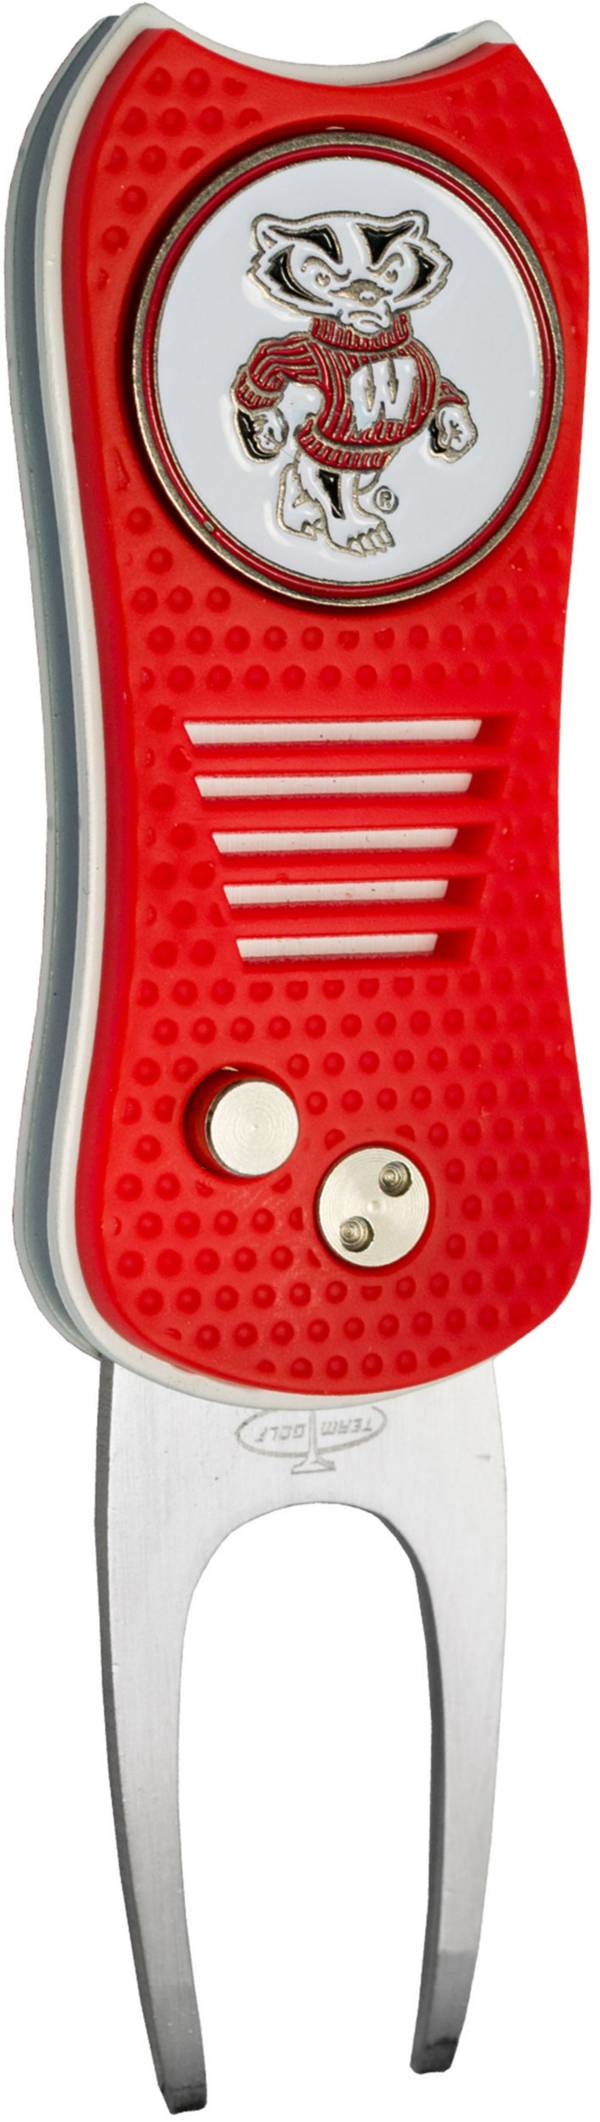 Team Golf Switchfix Wisconsin Badgers Divot Tool product image